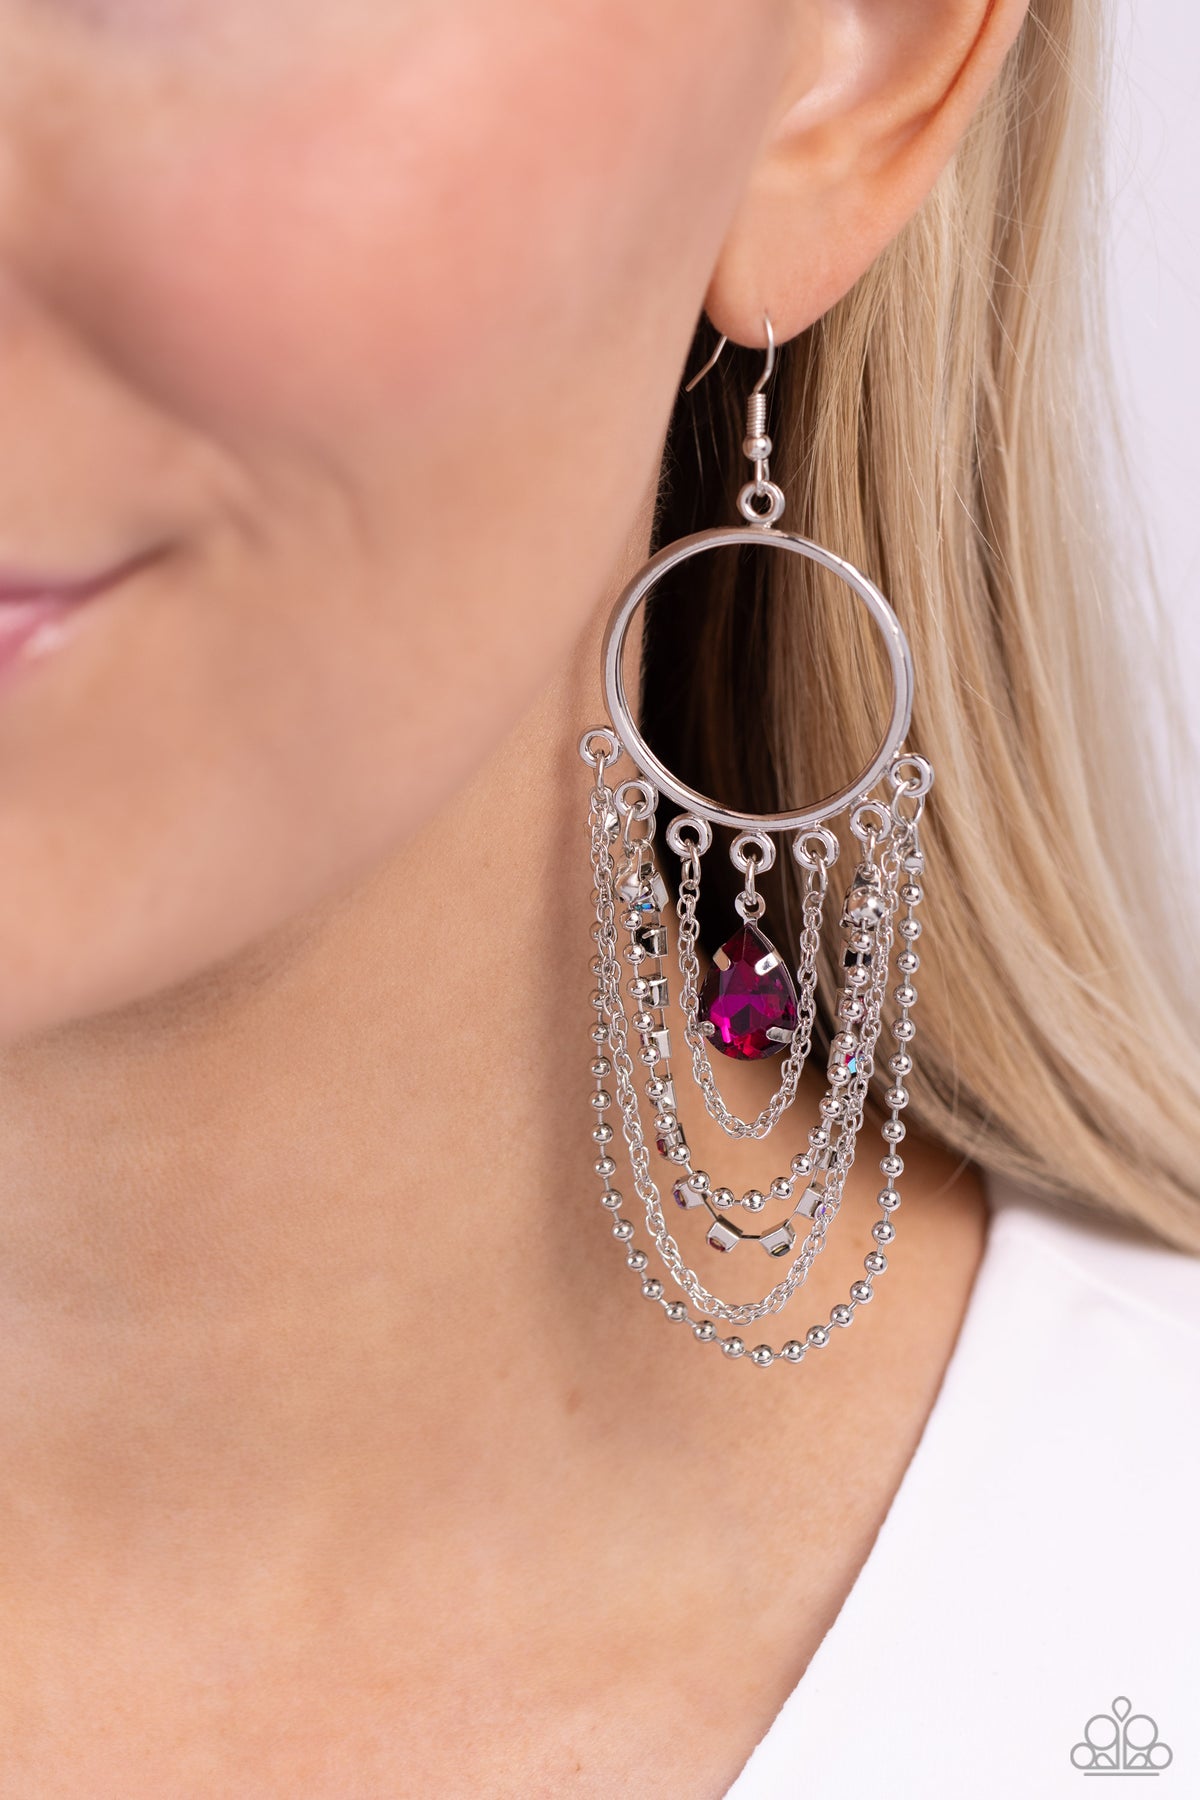 Reflective Rhinestones - Pink & Silver Earrings - Paparazzi Accessories